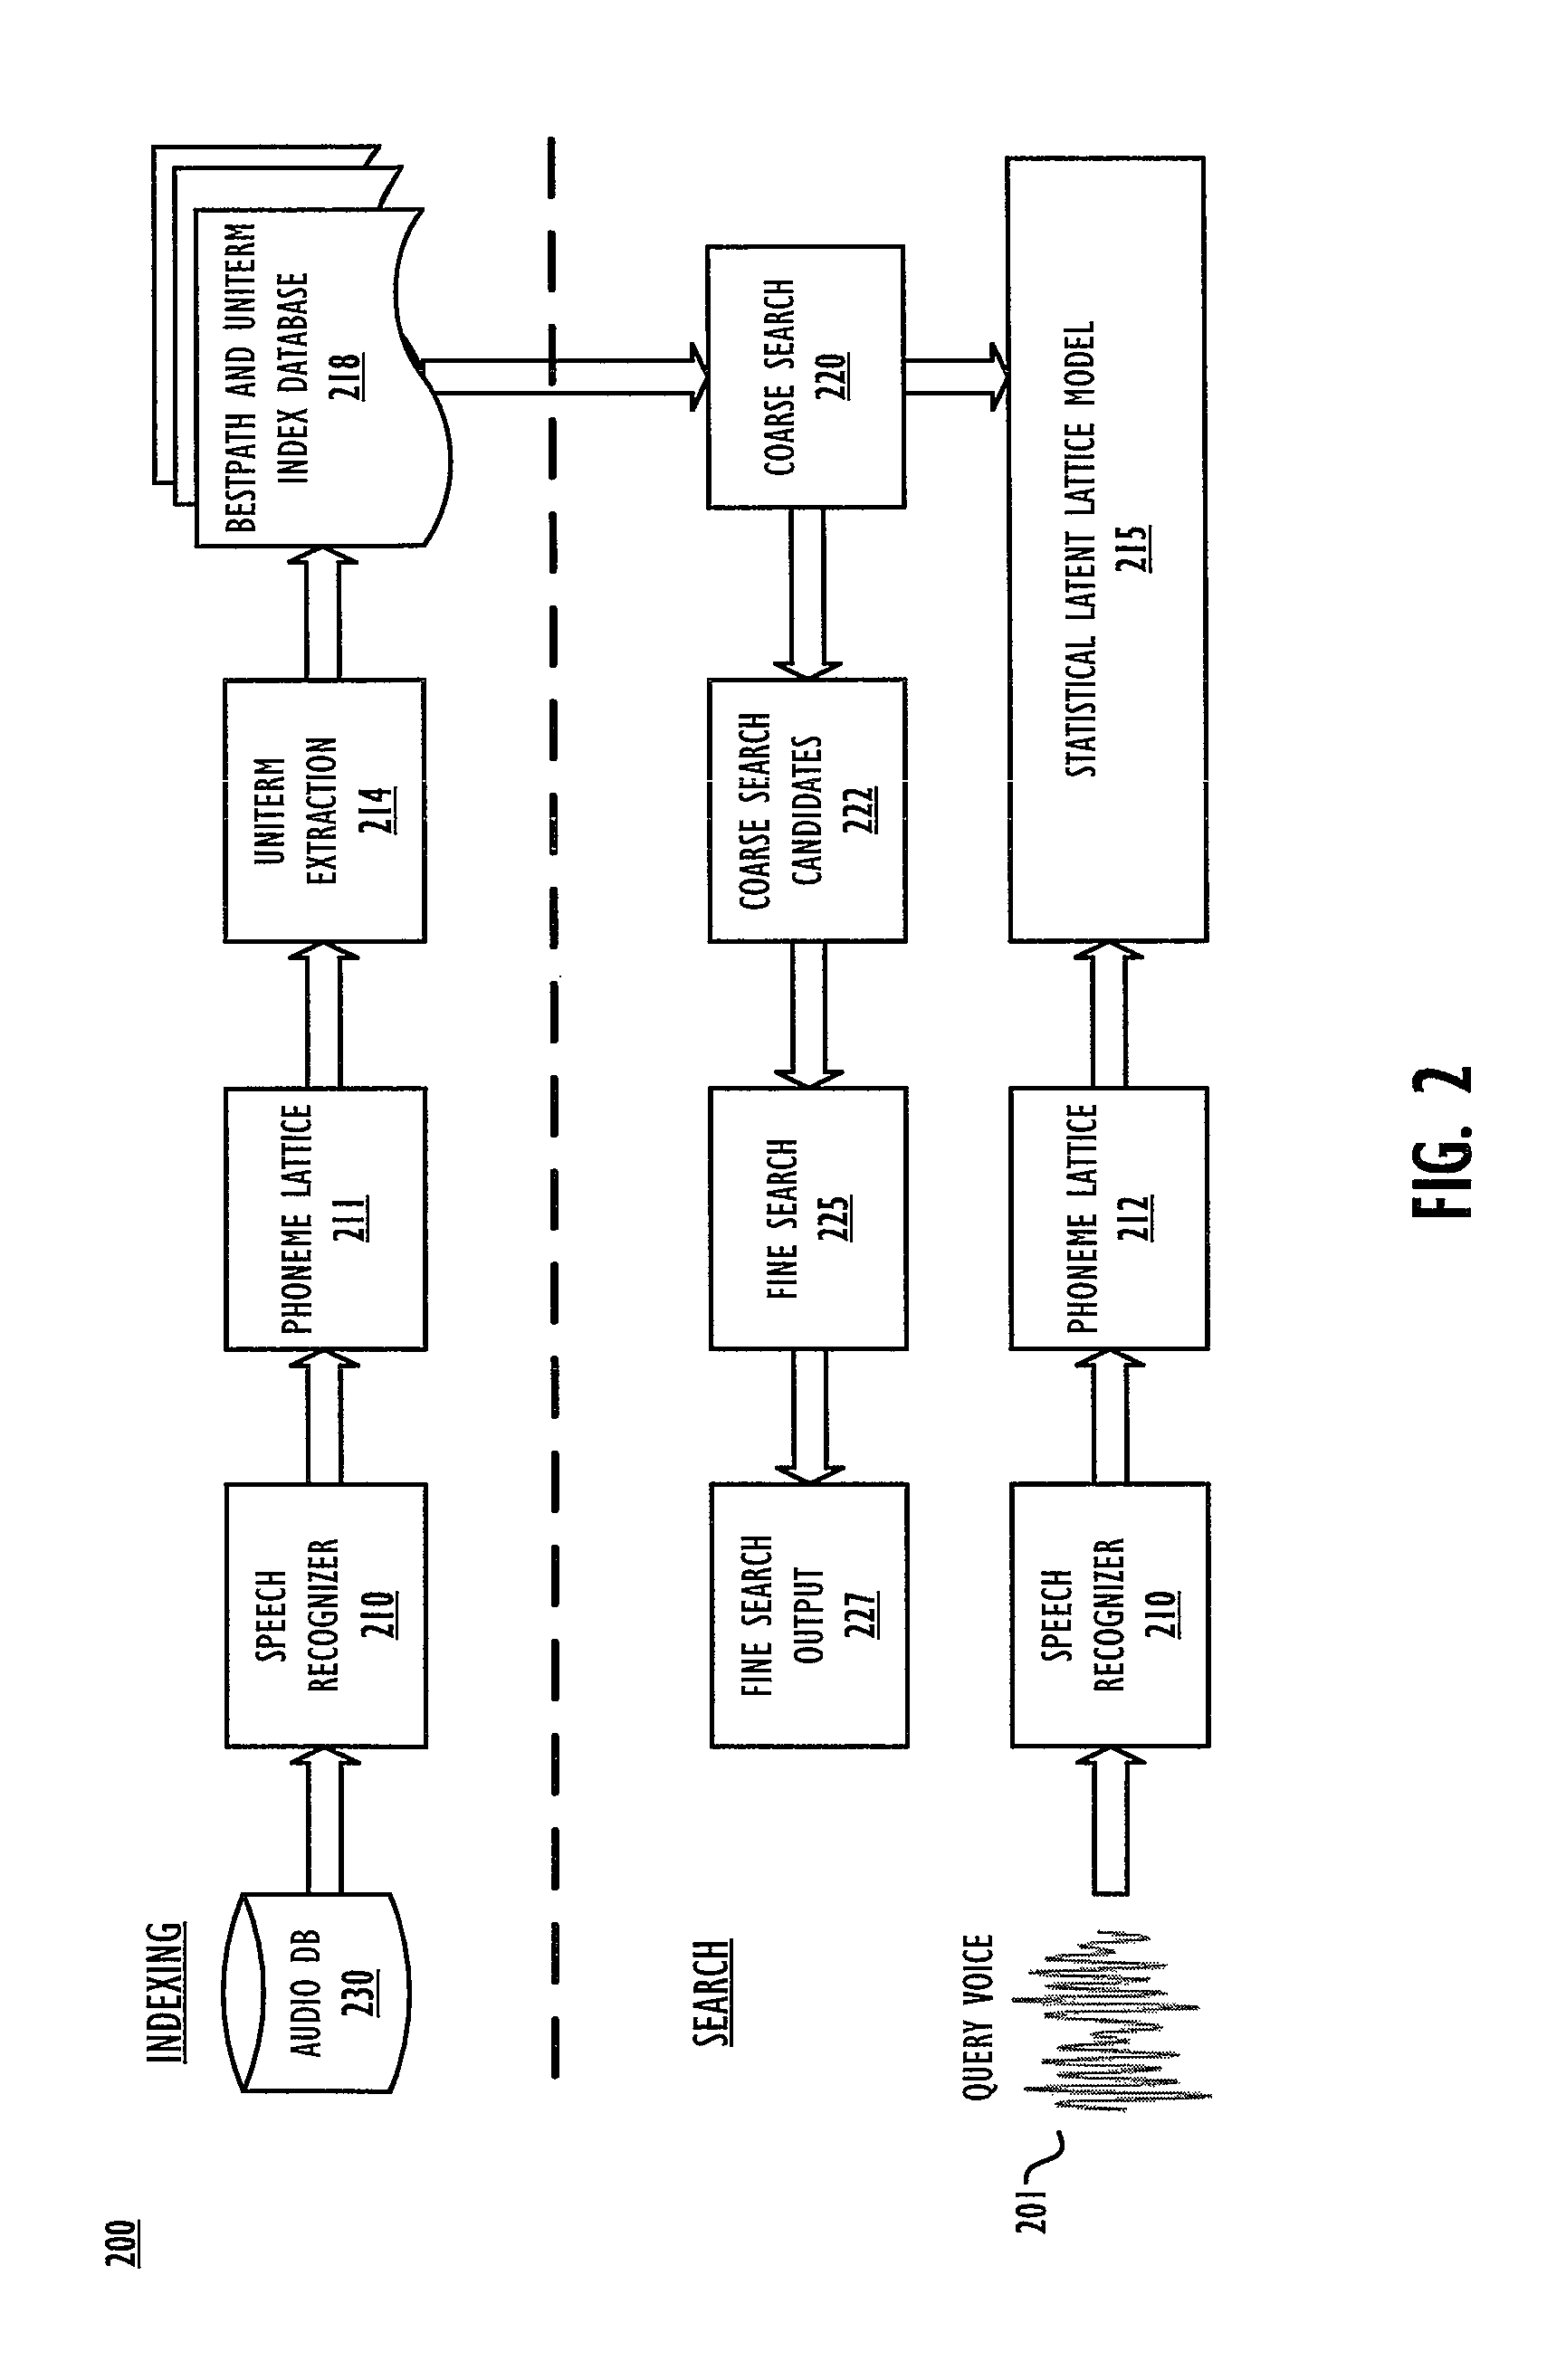 Method and apparatus for uniterm discovery and voice-to-voice search on mobile device